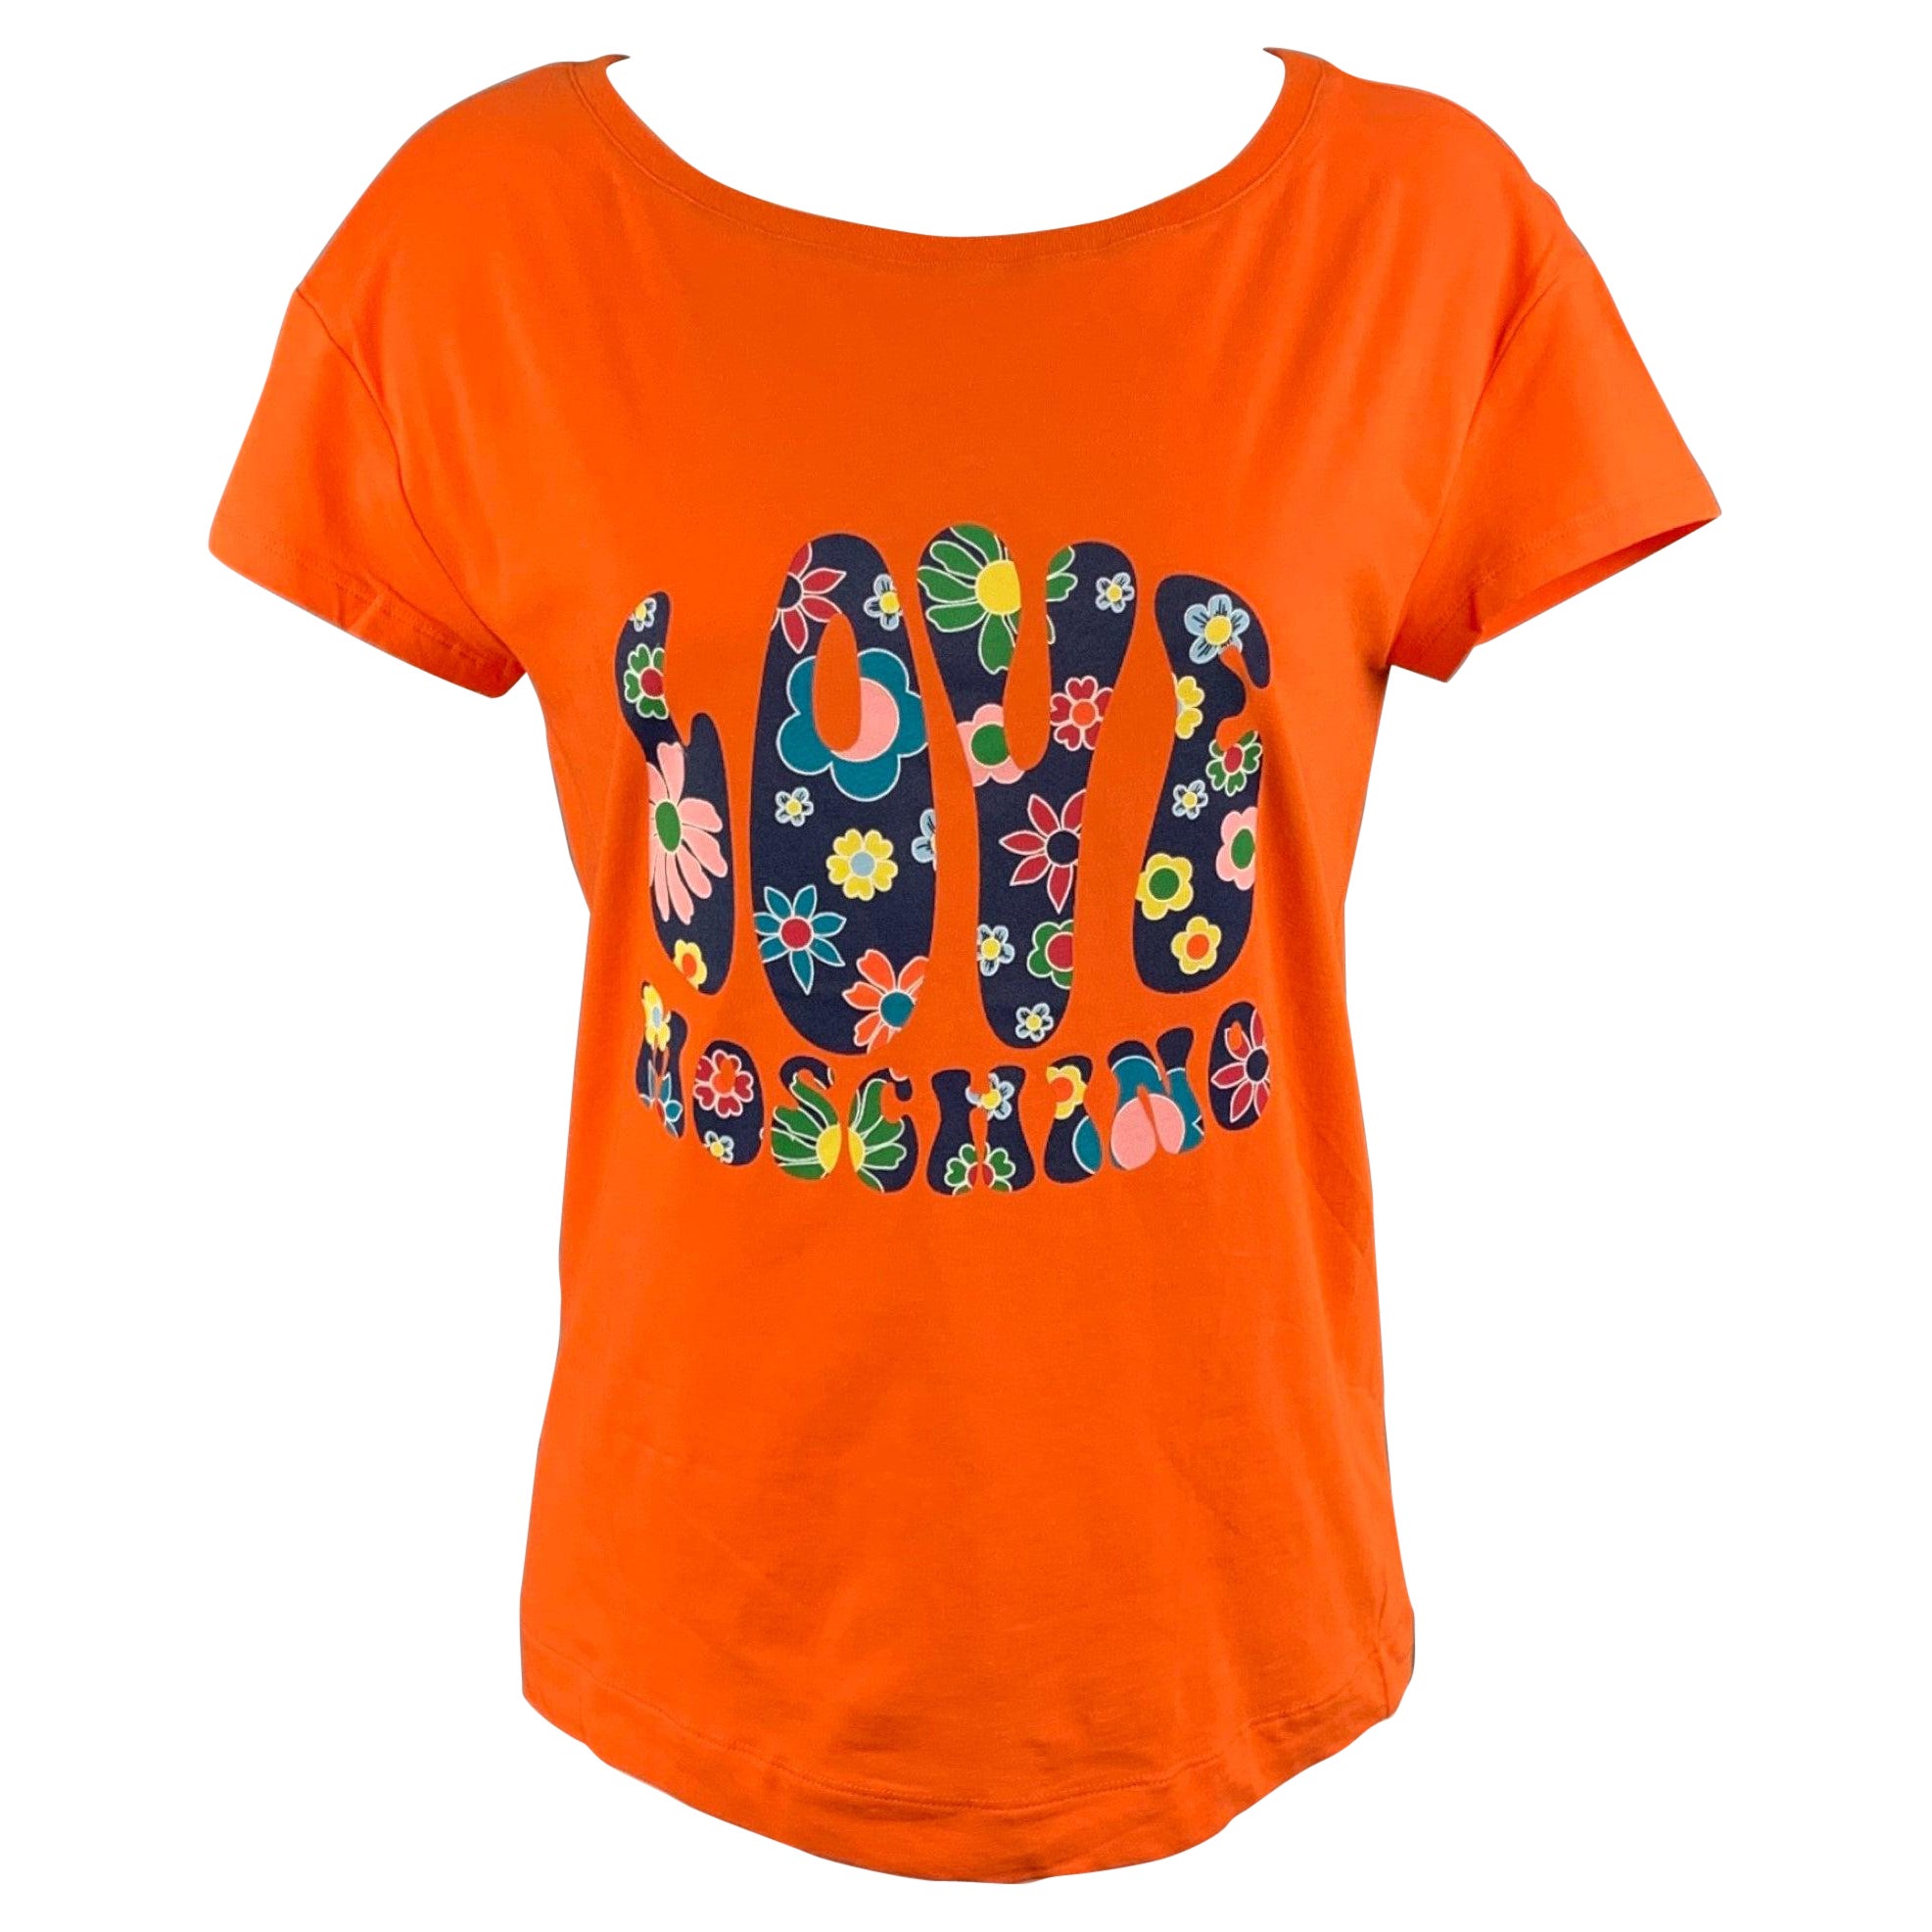 LOVE MOSCHINO Size 4 Orange Floral Graphic Cotton T-Shirt For Sale